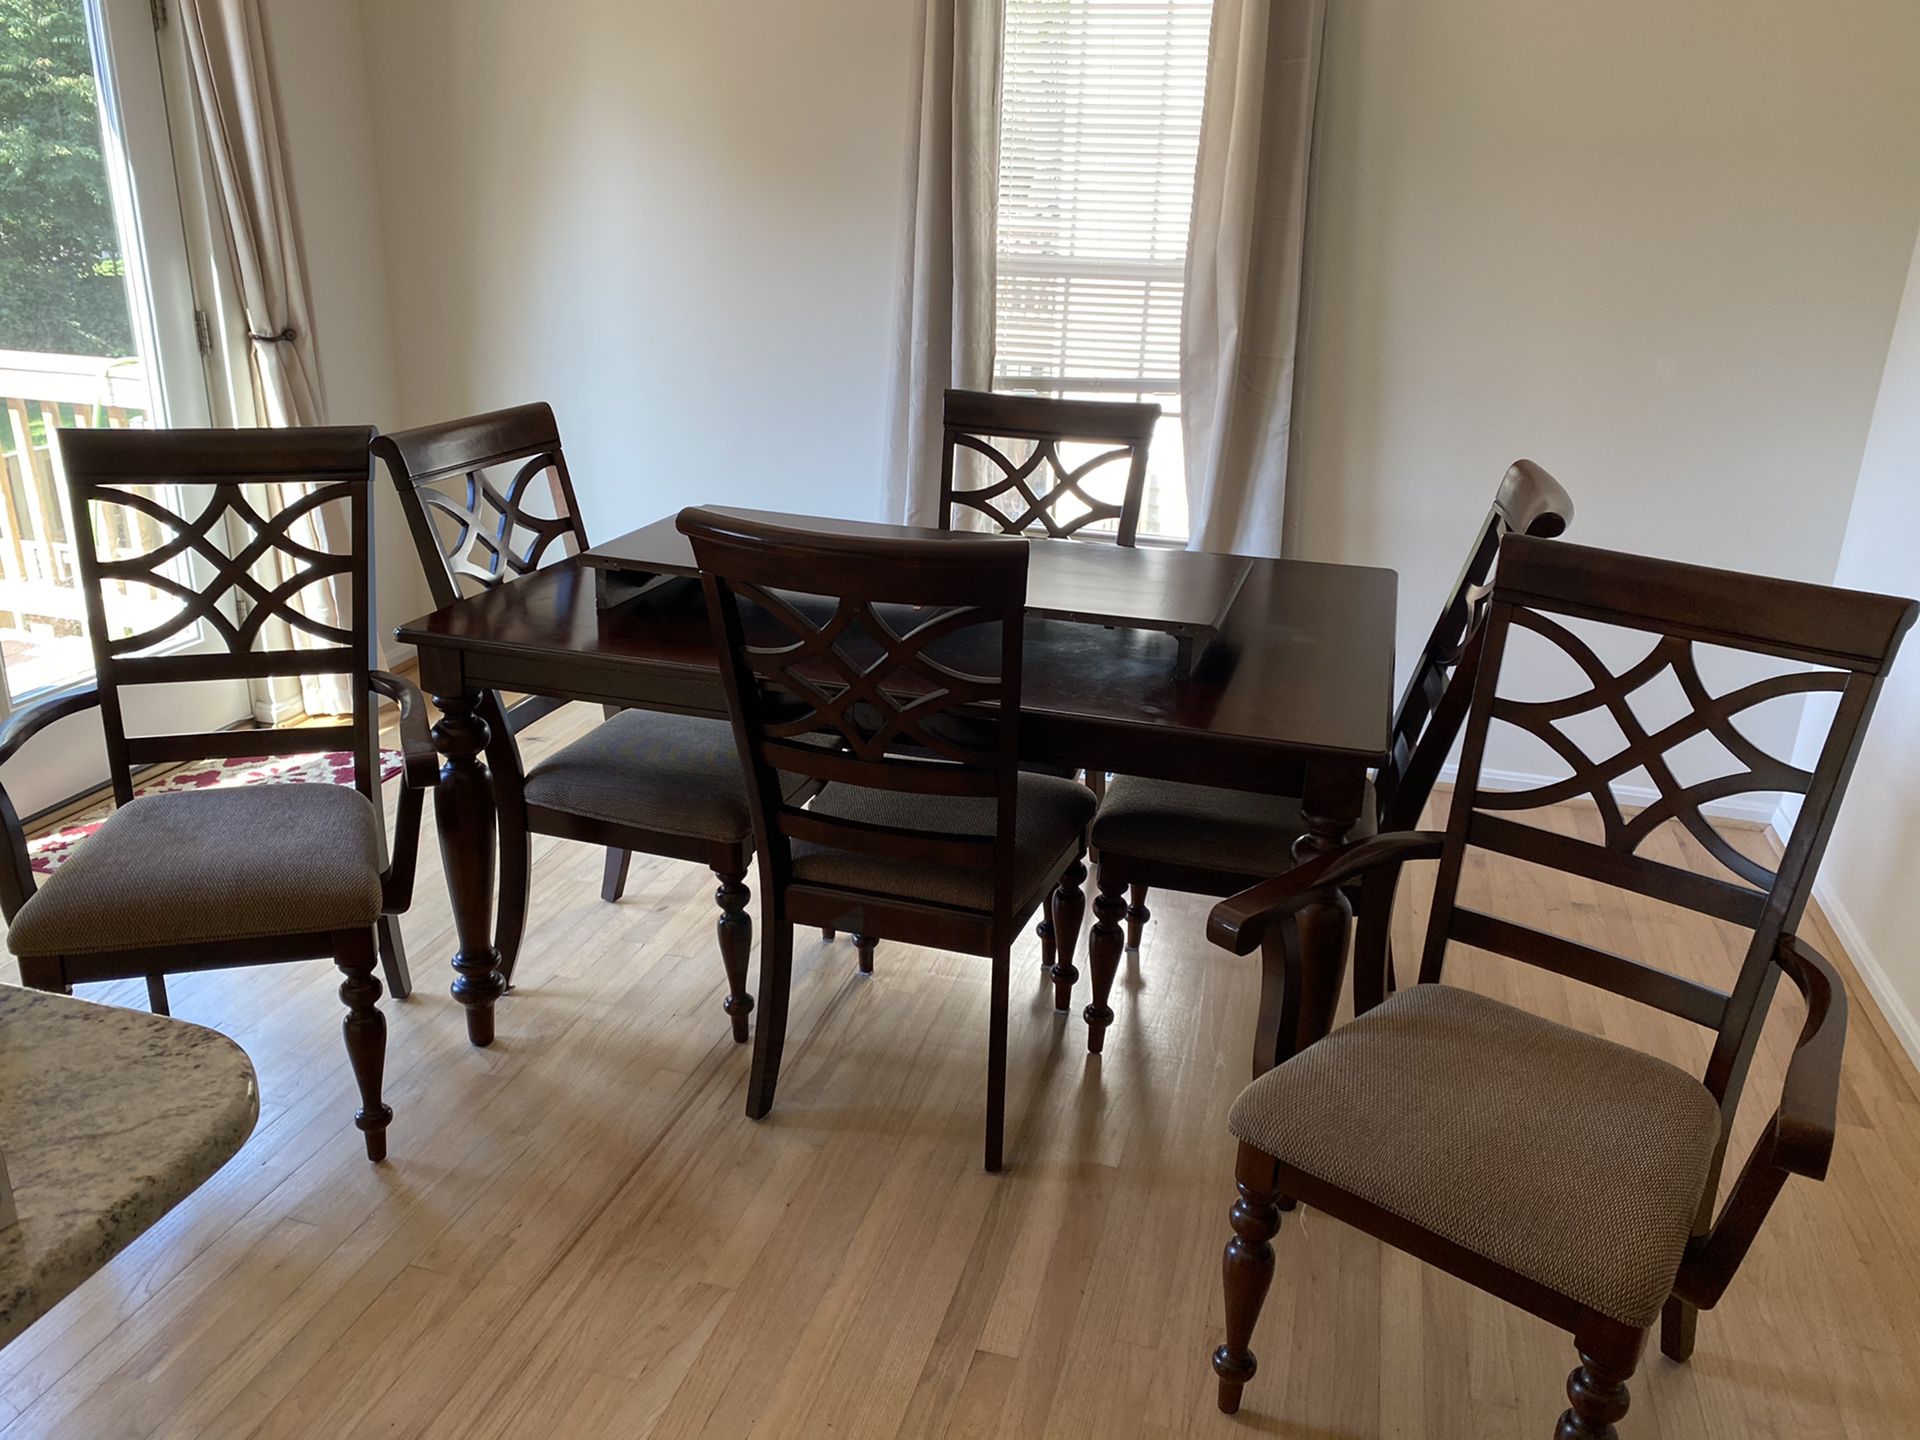 Dining room set with seating for six.